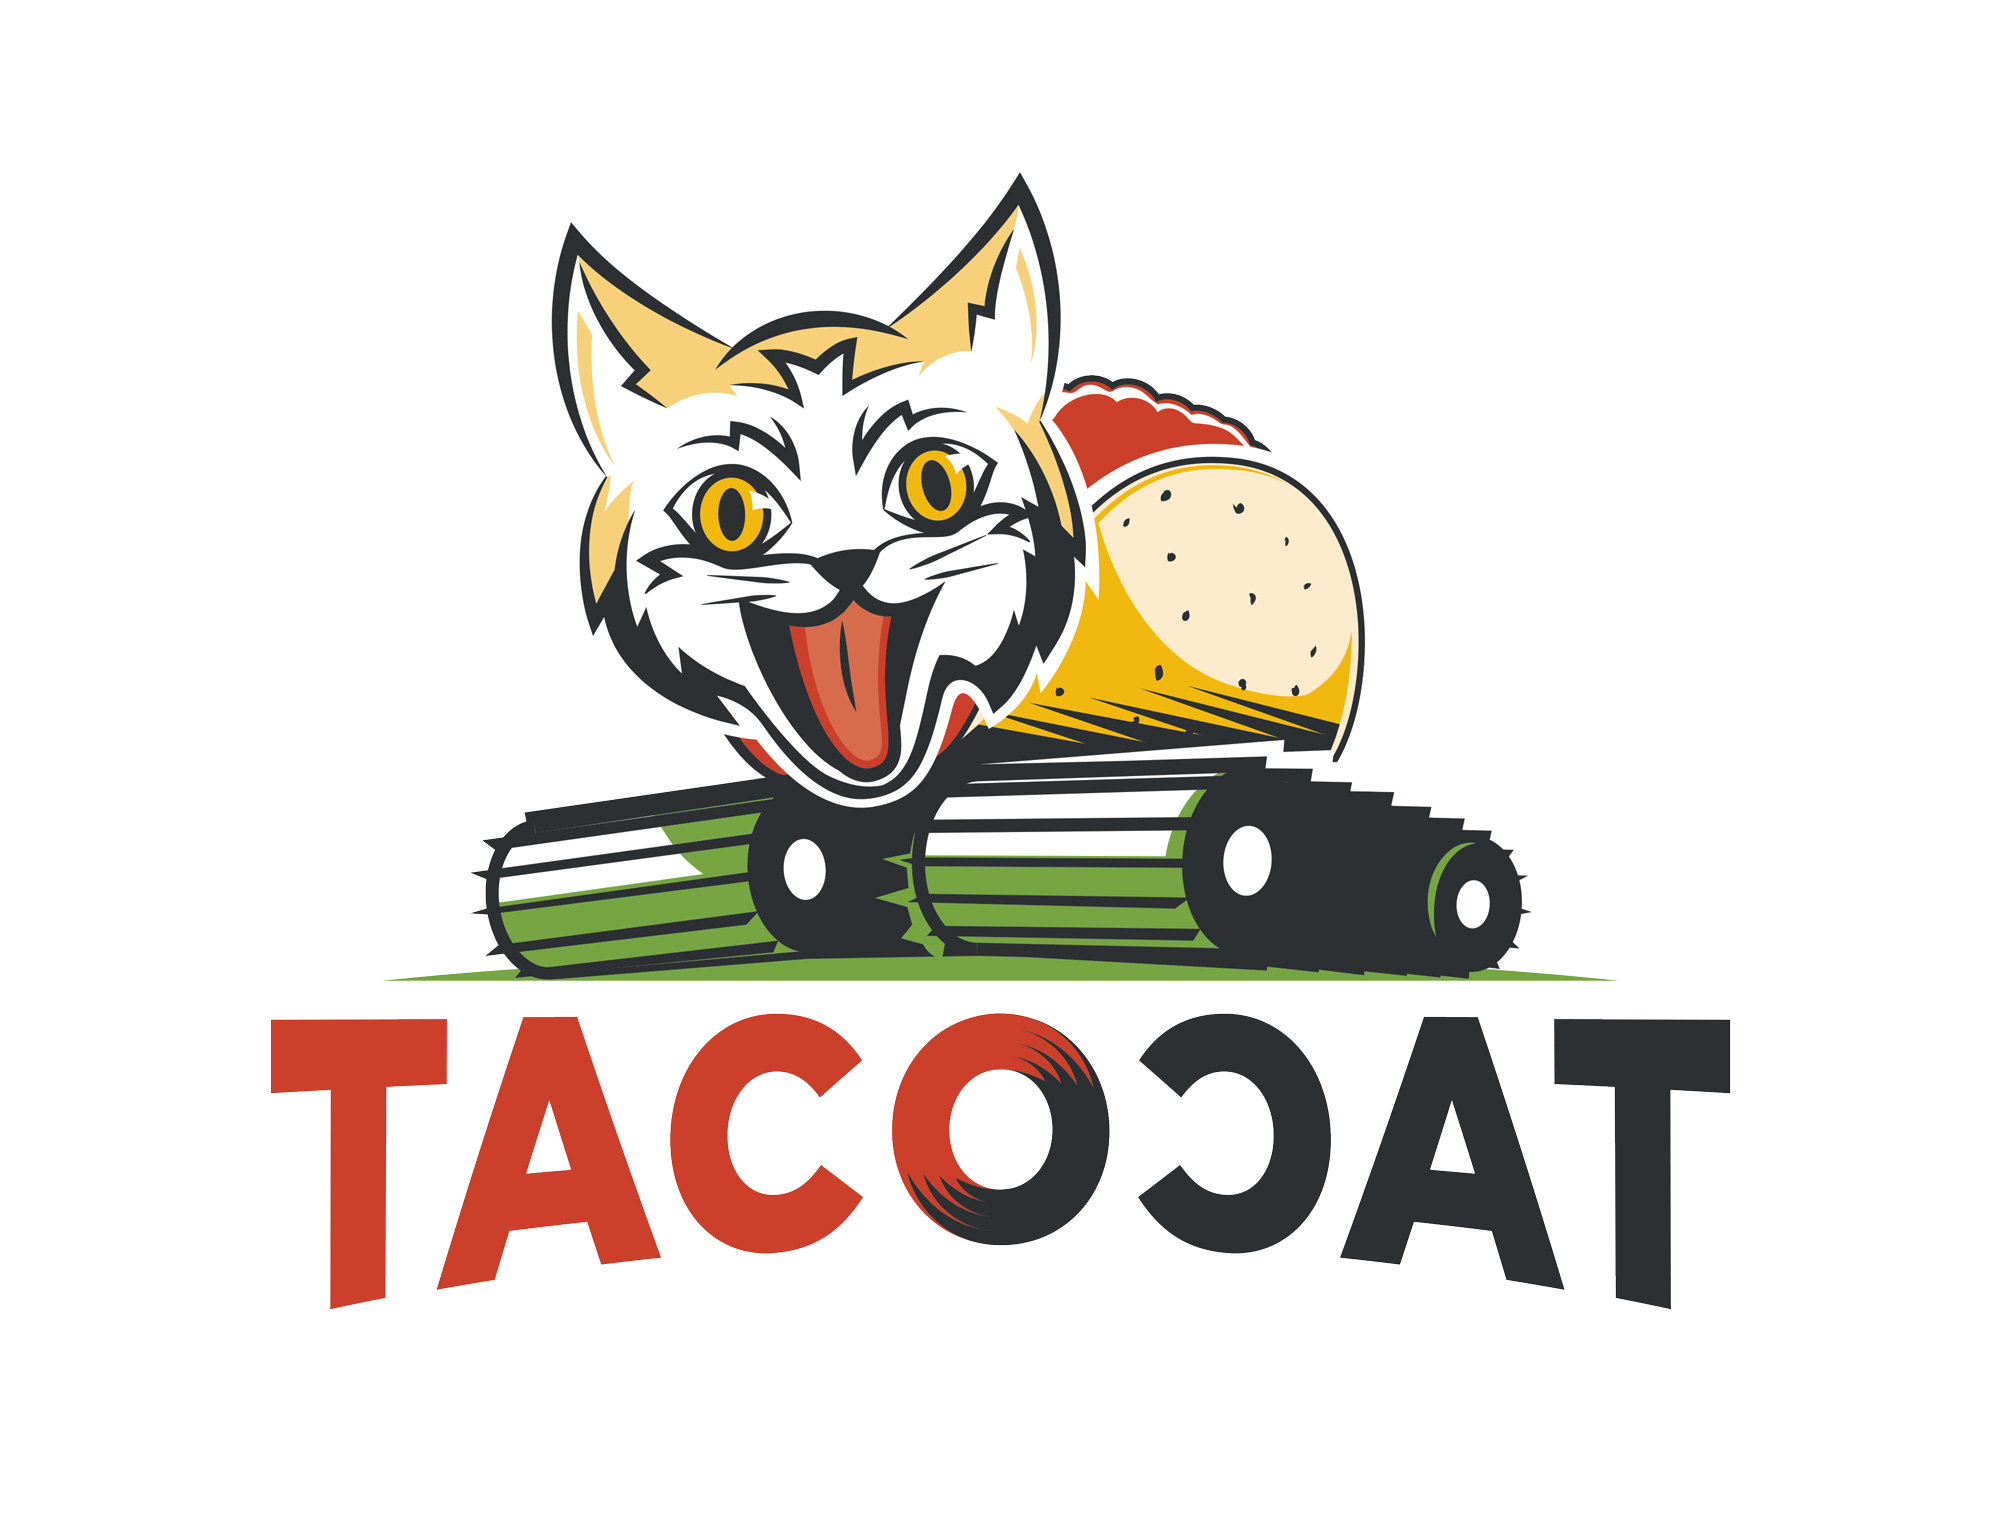 Graphic with the head of a cat, body of a taco, and tracks of a snow groomed with text "Tacocat" under